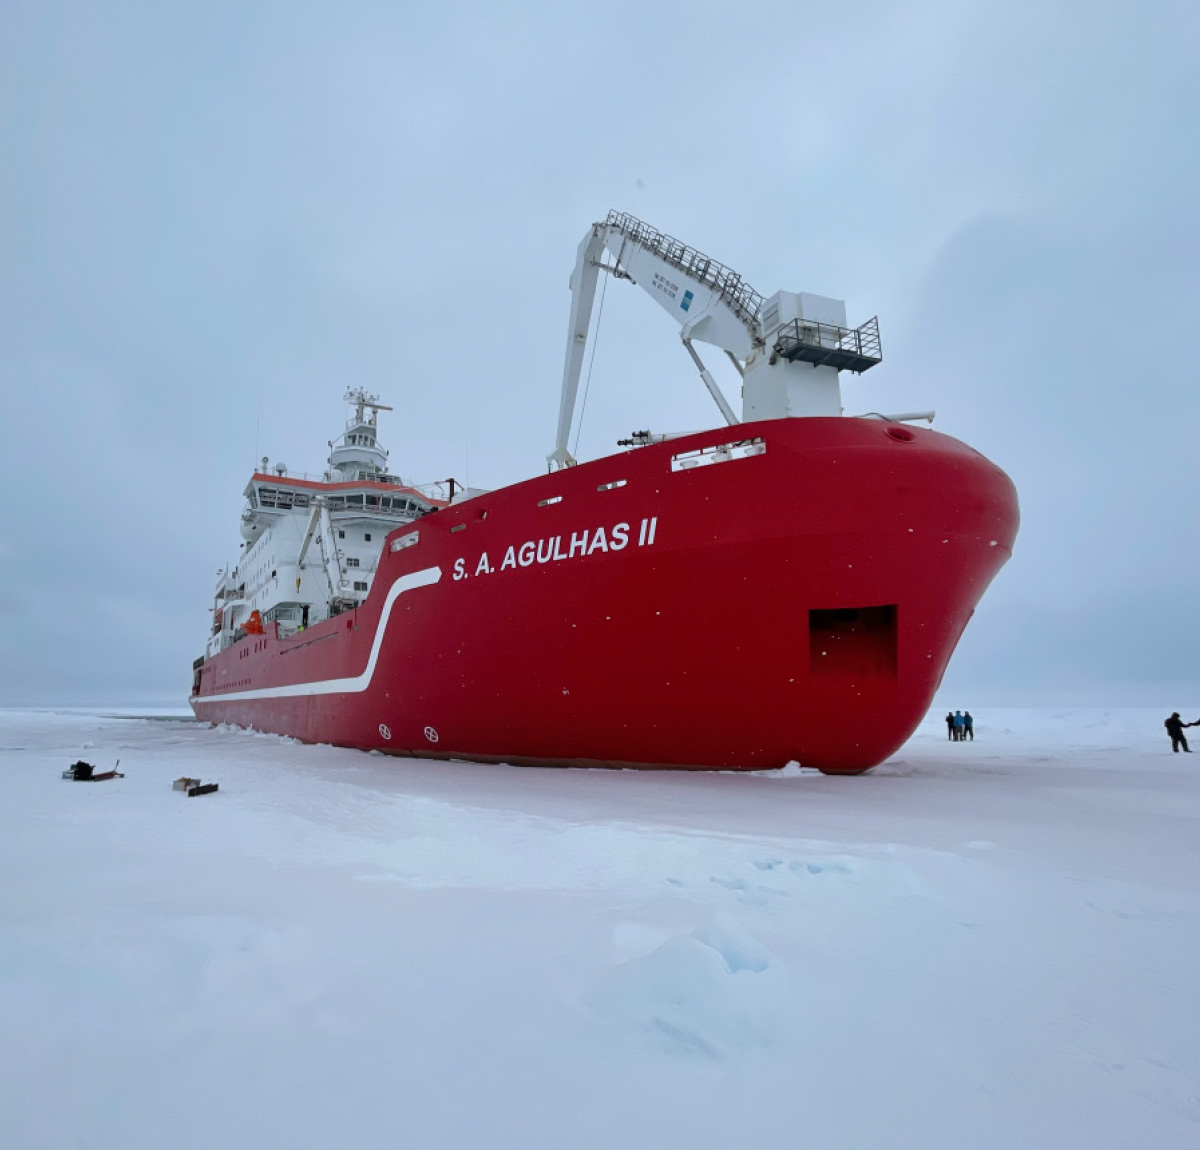 The Endurance22 crew spent a month traveling on the Weddell Sea